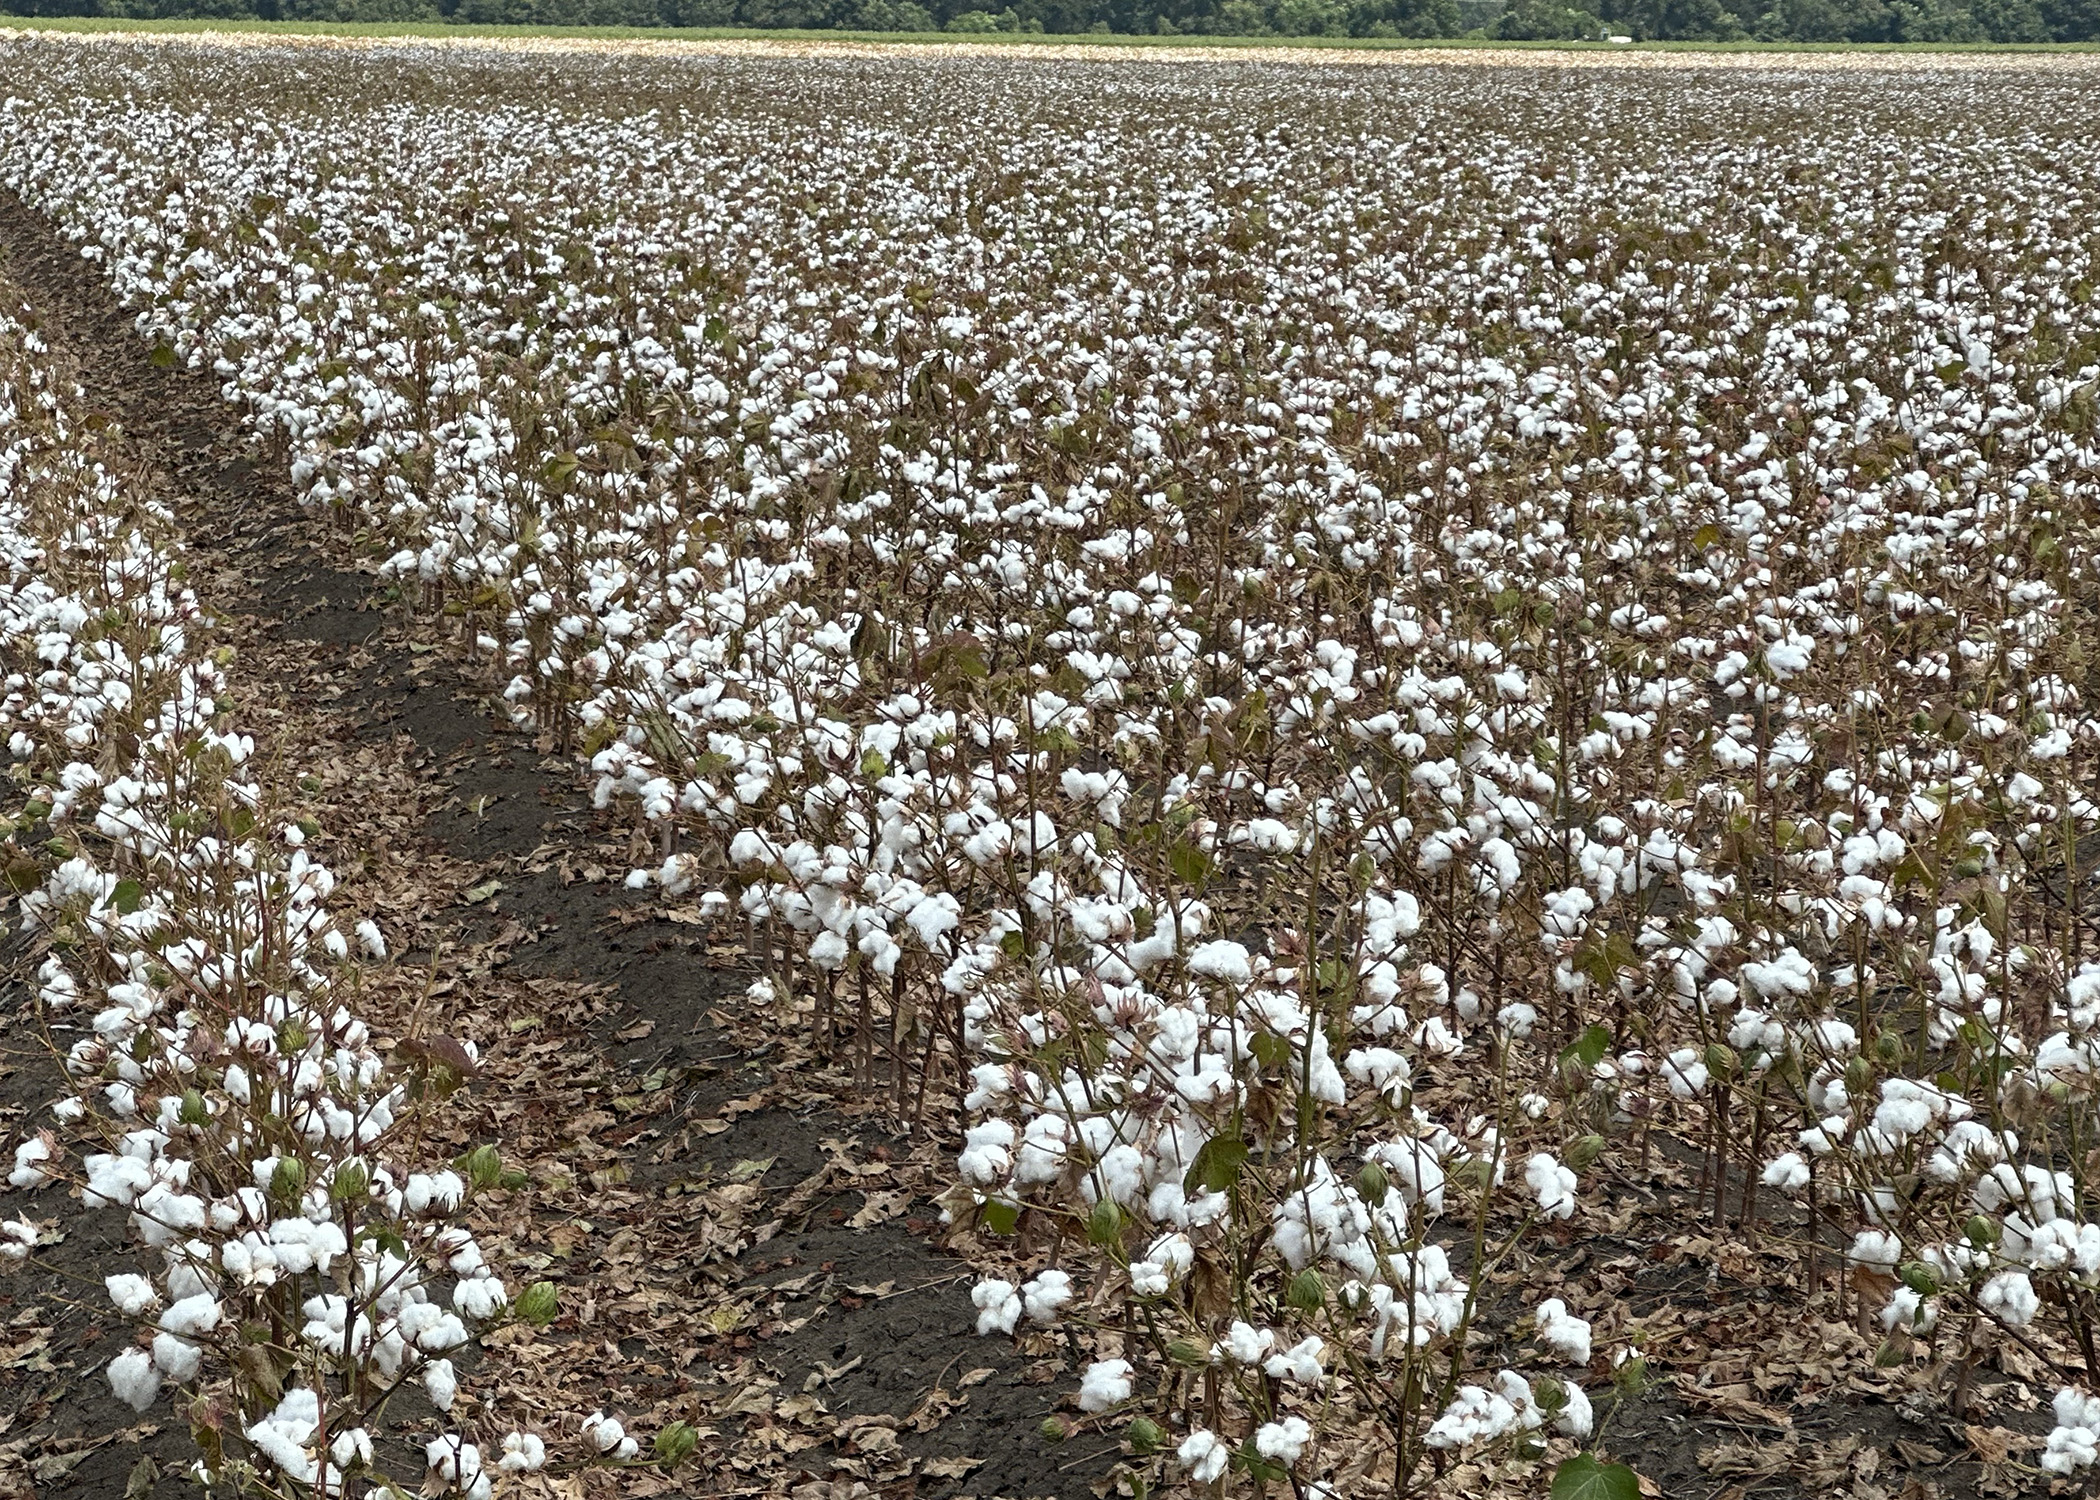 Highly variable cotton crop reaching harvest